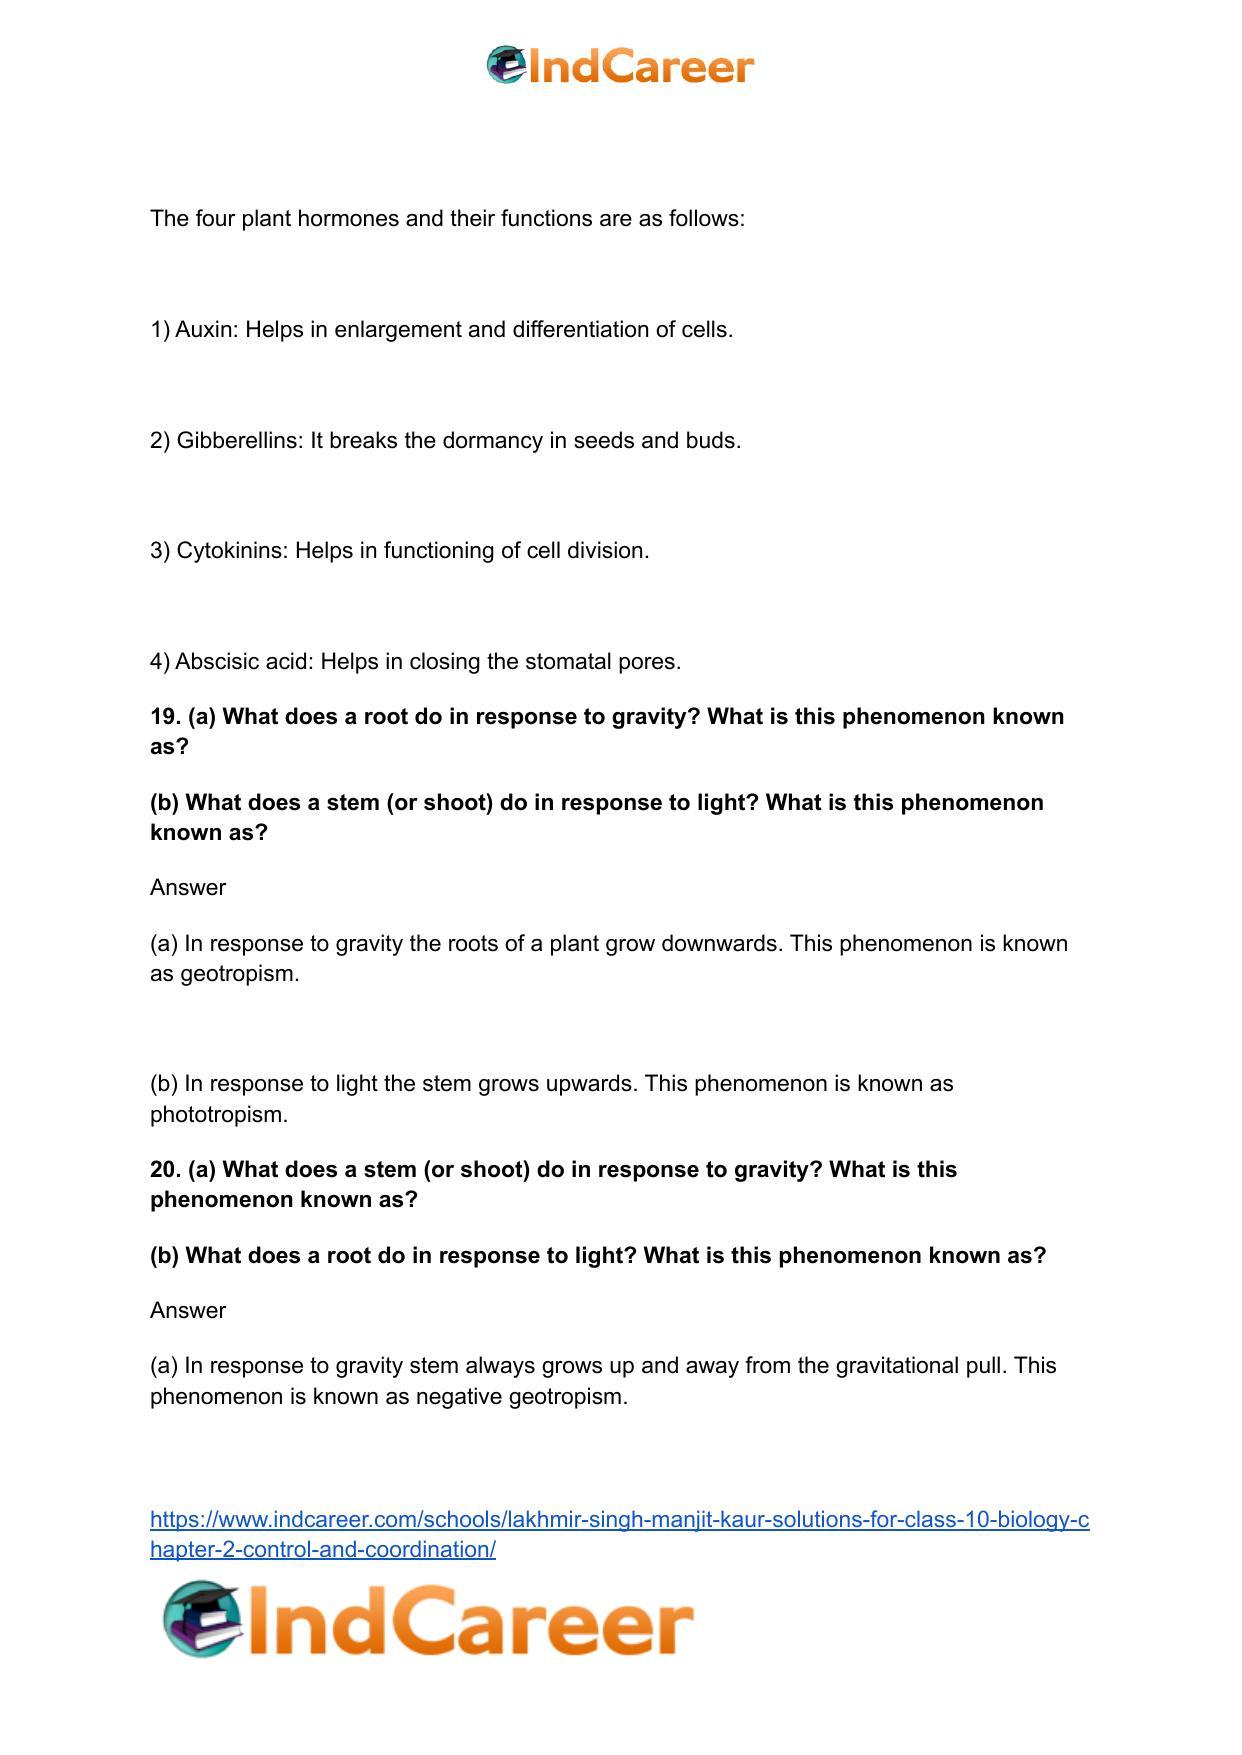 Lakhmir Singh Manjit Kaur  Solutions for Class 10 Biology: Chapter 2- Control And Coordination - Page 8